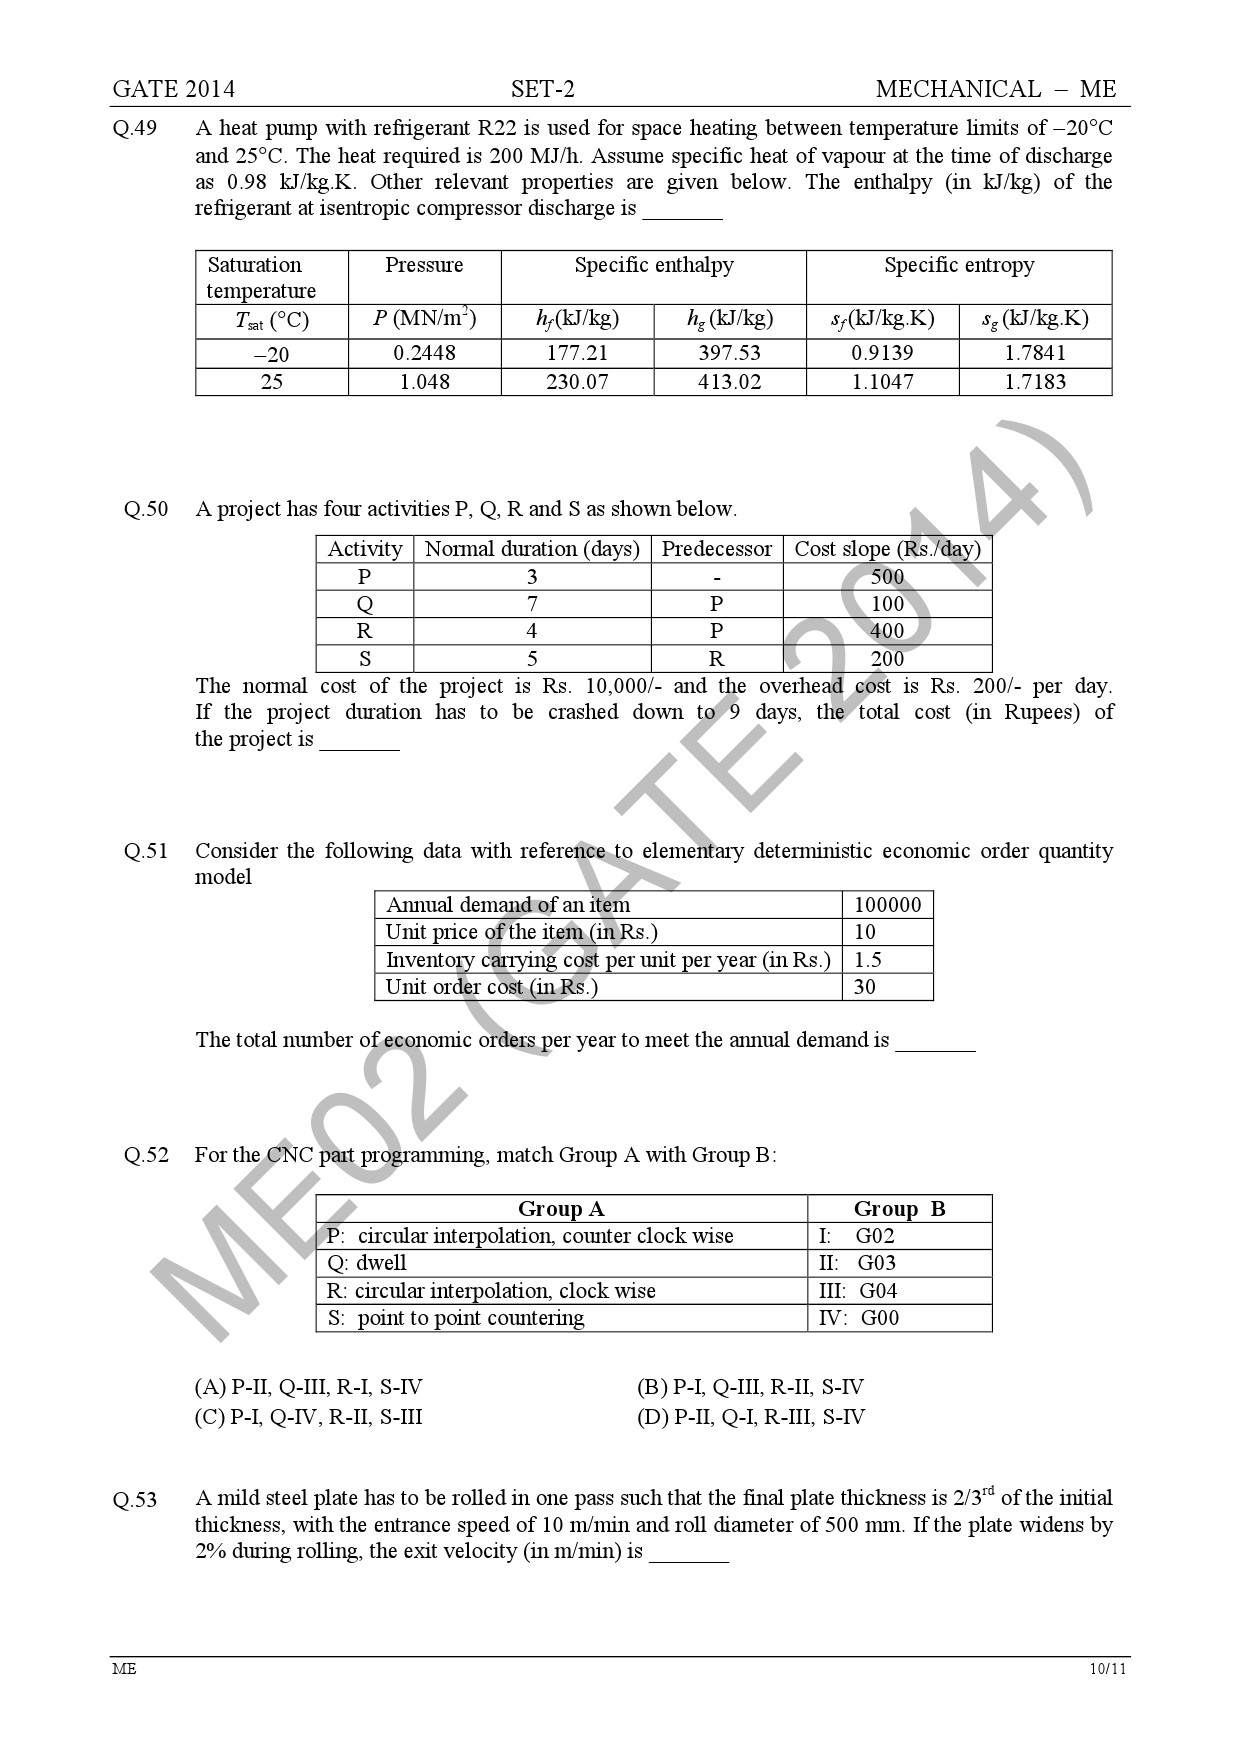 GATE Exam Question Paper 2014 Mechanical Engineering Set 2 16